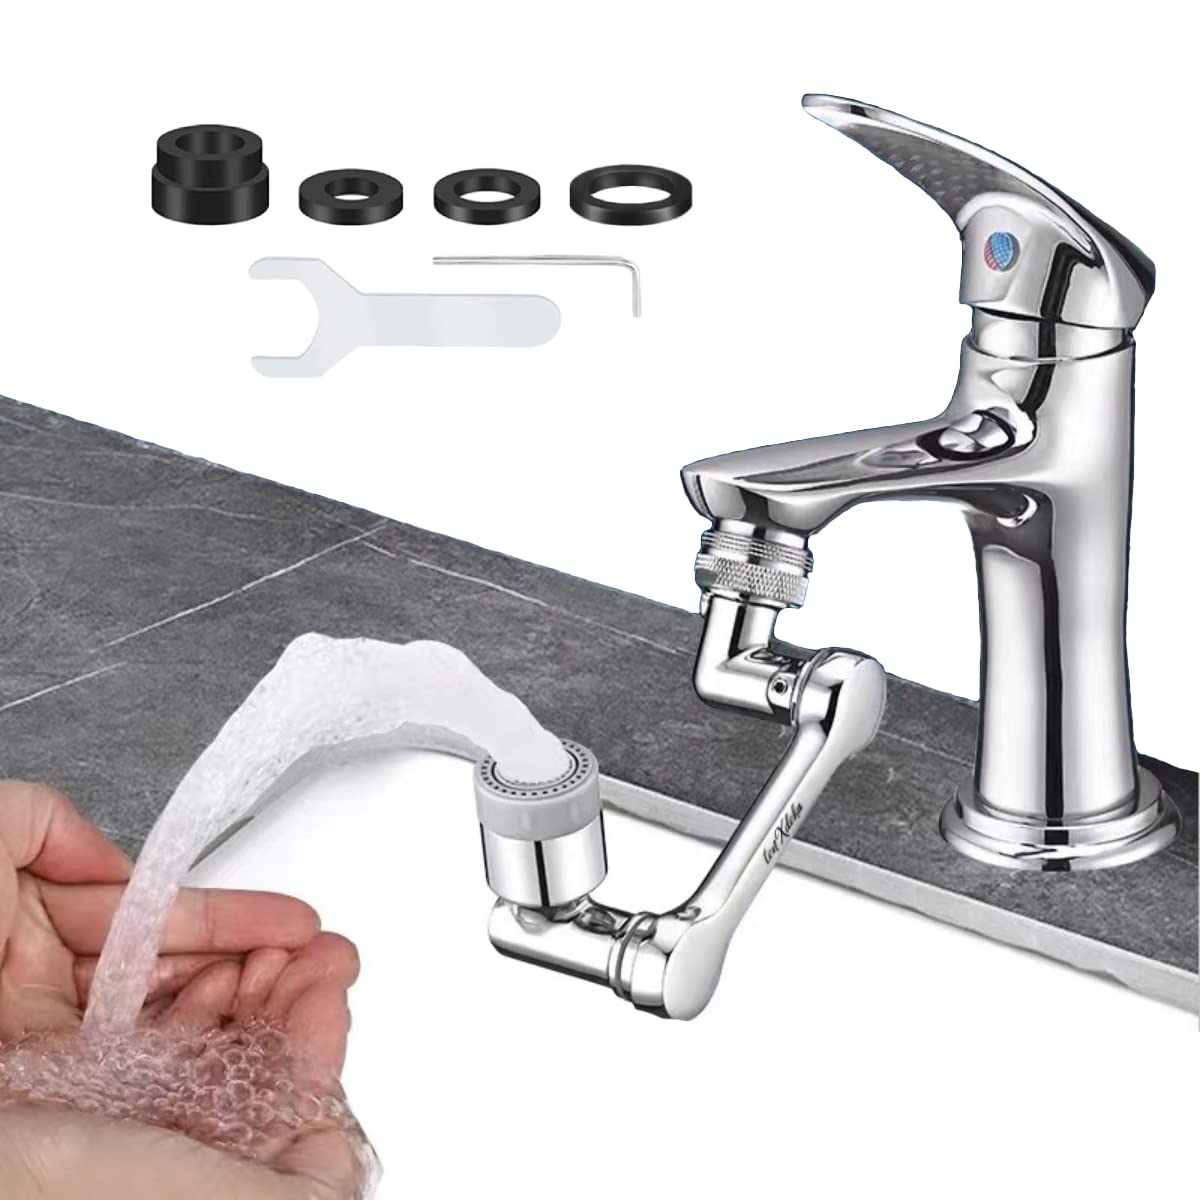 TENXDEKA Rotatable Faucet Extender - Swivel Faucet Aerator - Universal Connection - 1080 Faucet Attachment - Dual Function 2 Flow from Stream to Spray Head - Triple Thread Connector - Easy to Install